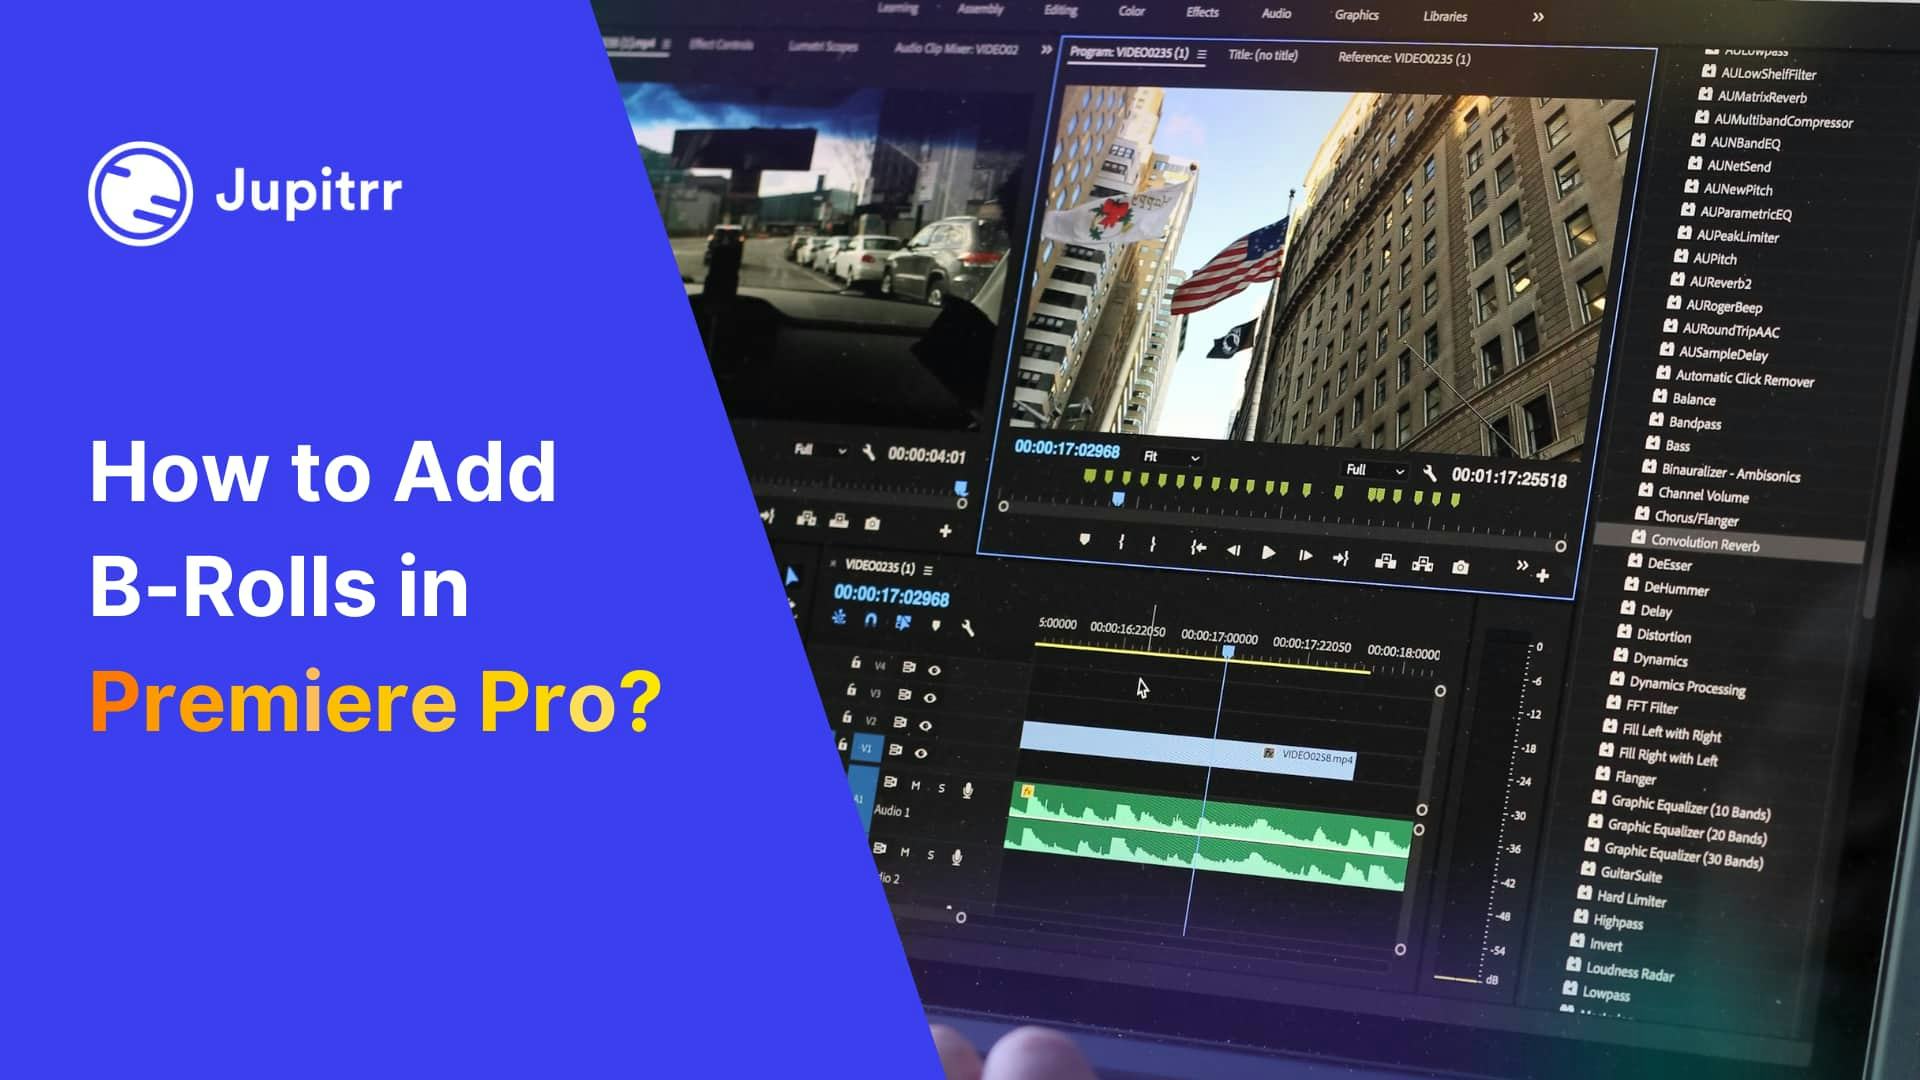 How to Add B-Roll Clips in Premiere Pro?